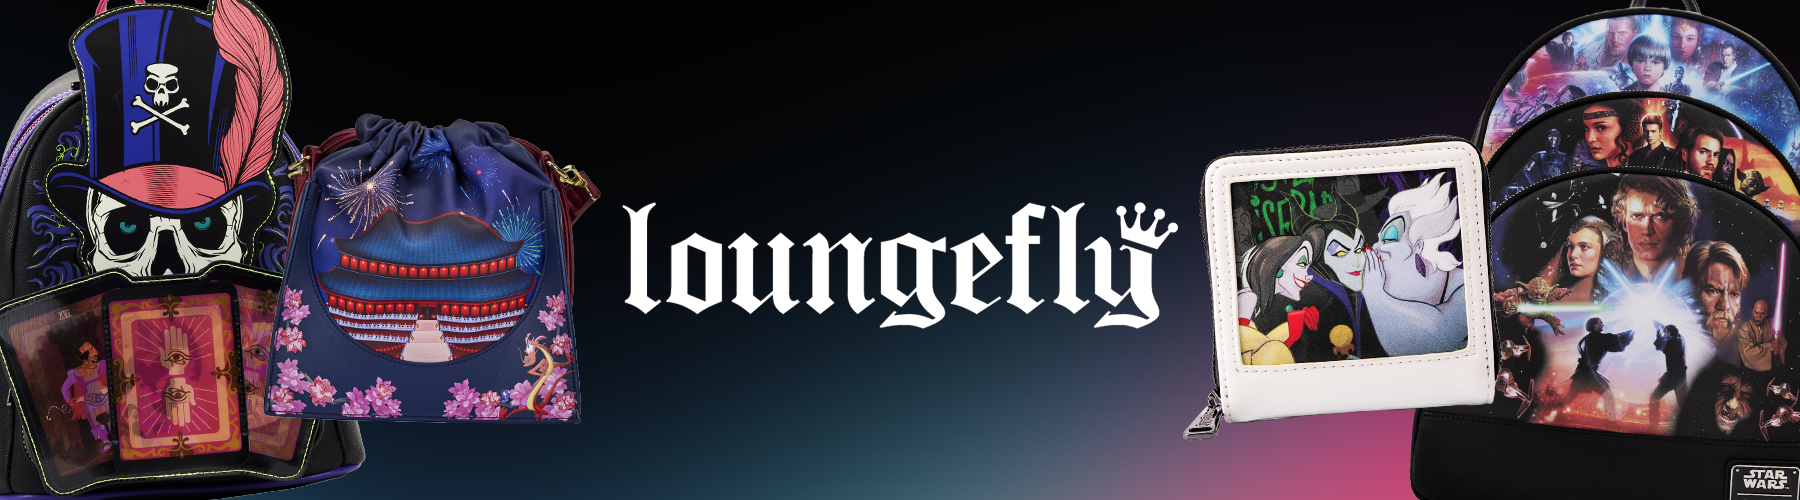 Loungefly, Accessories